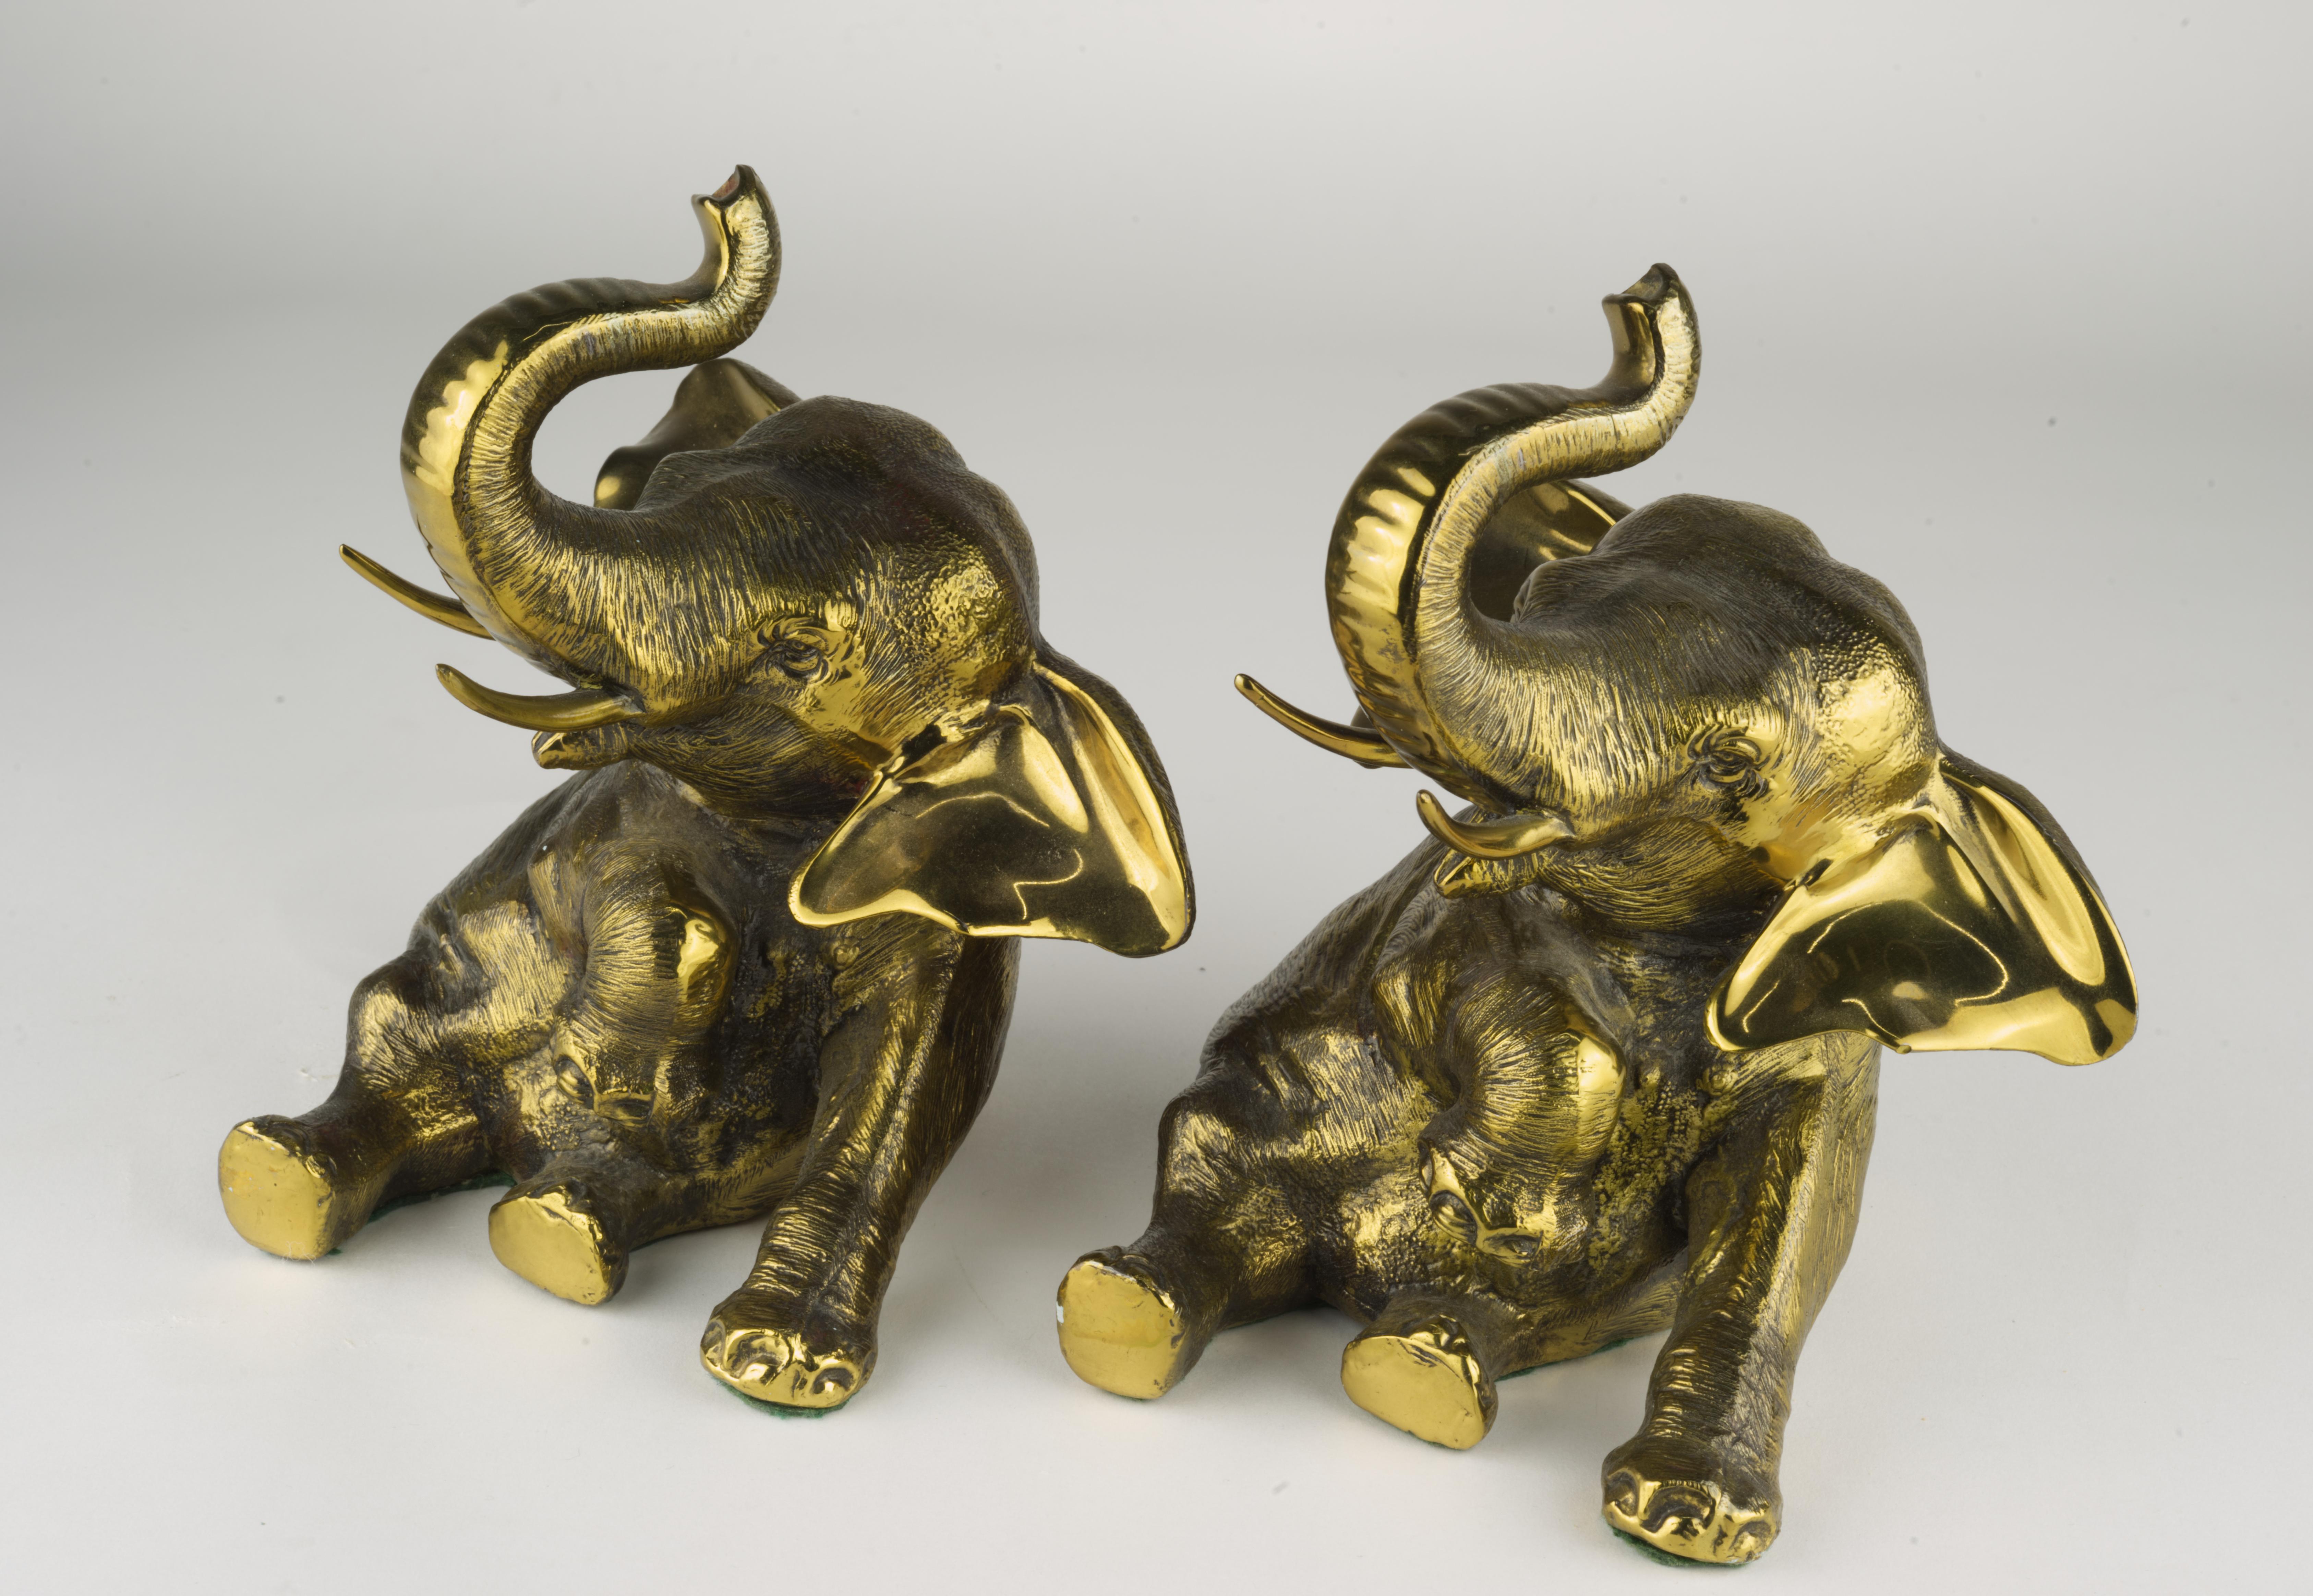  Rare pair of bronze elephant bookends was manufactured by Jennings Brothers in 1920s-1930s. Both pieces have retained their beautiful patina and the original felt bottoms. Each piece is marked JB on the bottom under the felt.

Jennings Brothers,